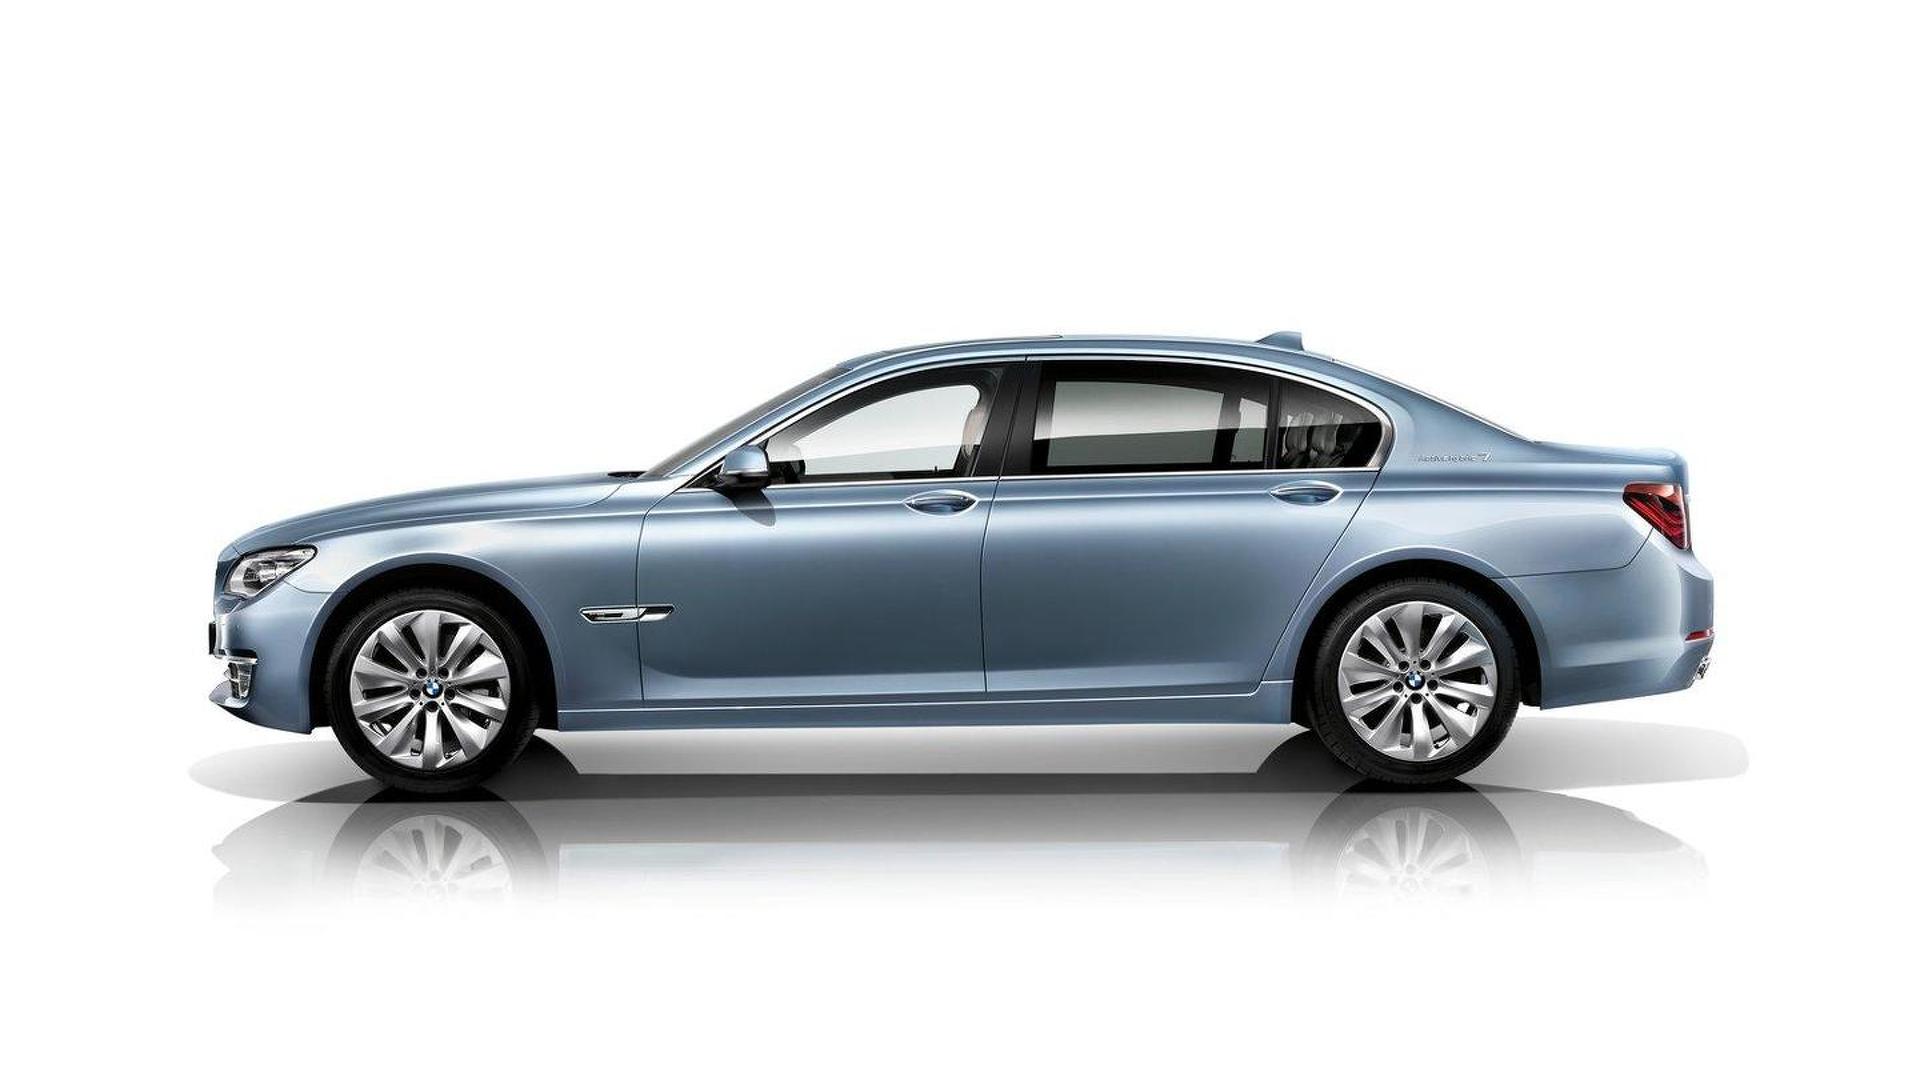 2013 BMW 7-Series facelift revealed [video]